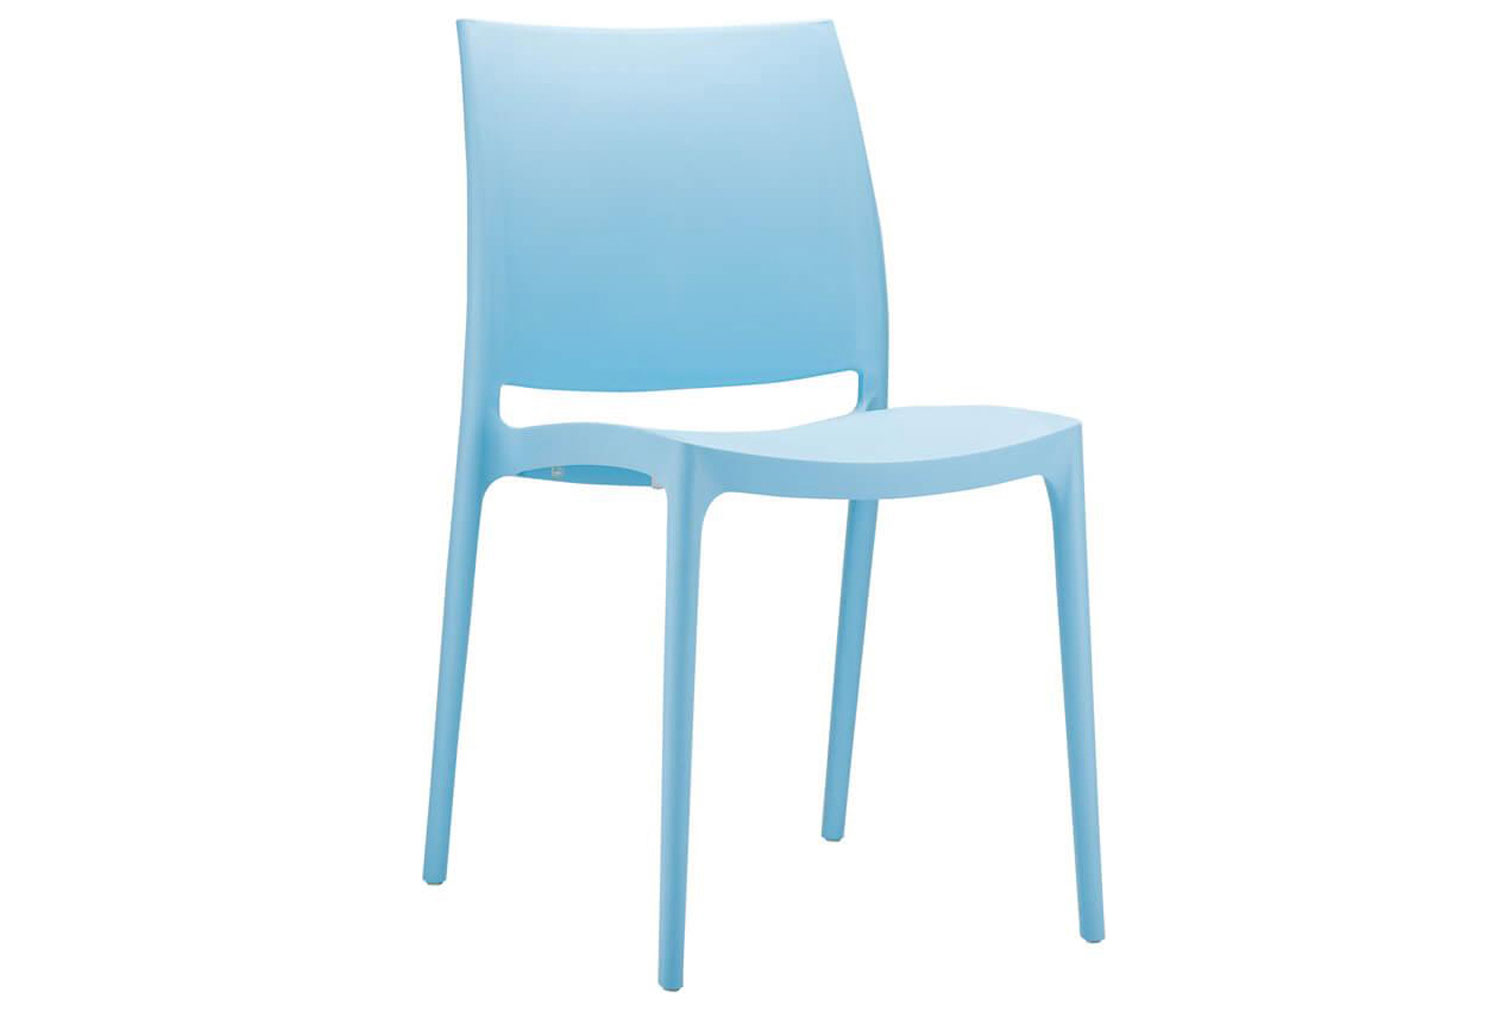 Qty 2 - Sugarloaf Stacking Side Chair, Light Blue